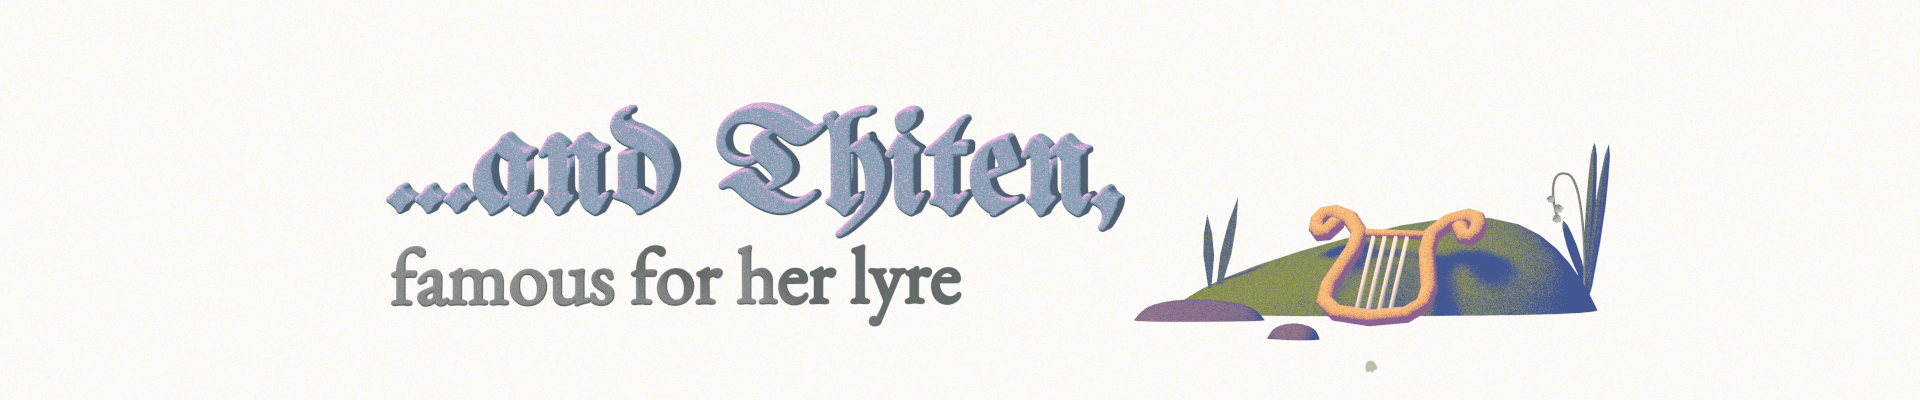 ...and Thiten, famous for her lyre